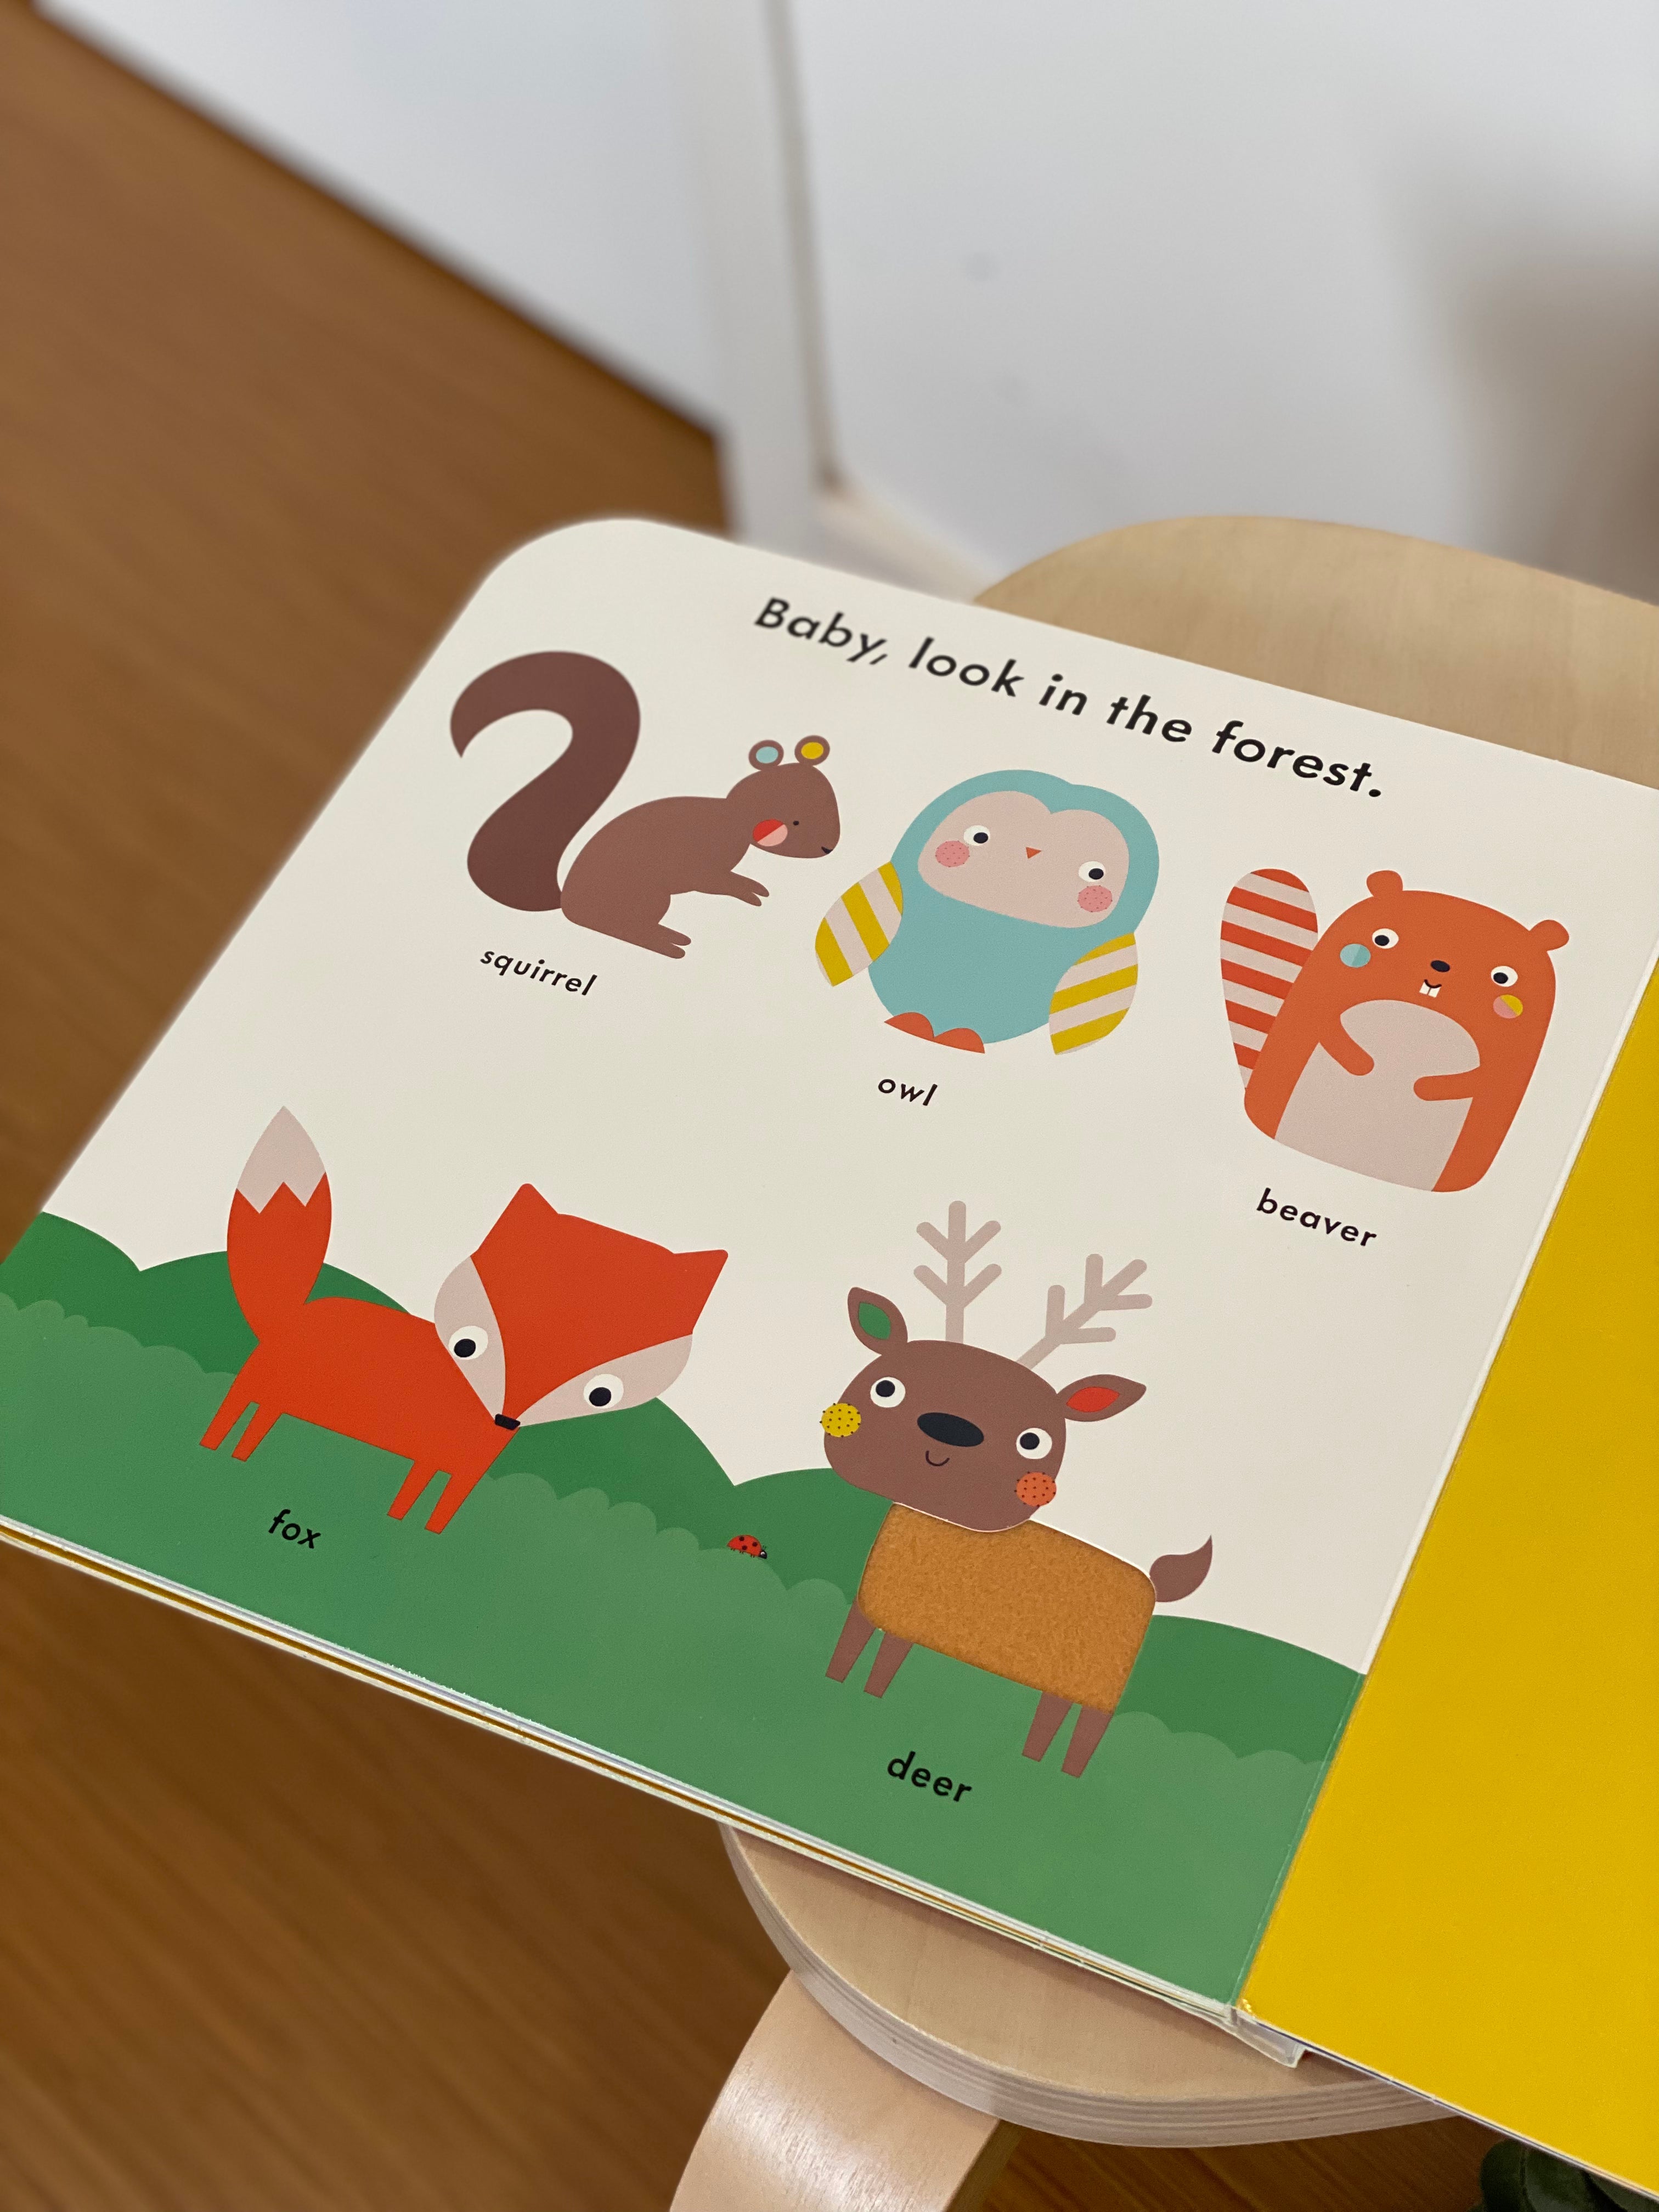 Baby Touch: Hide and Seek